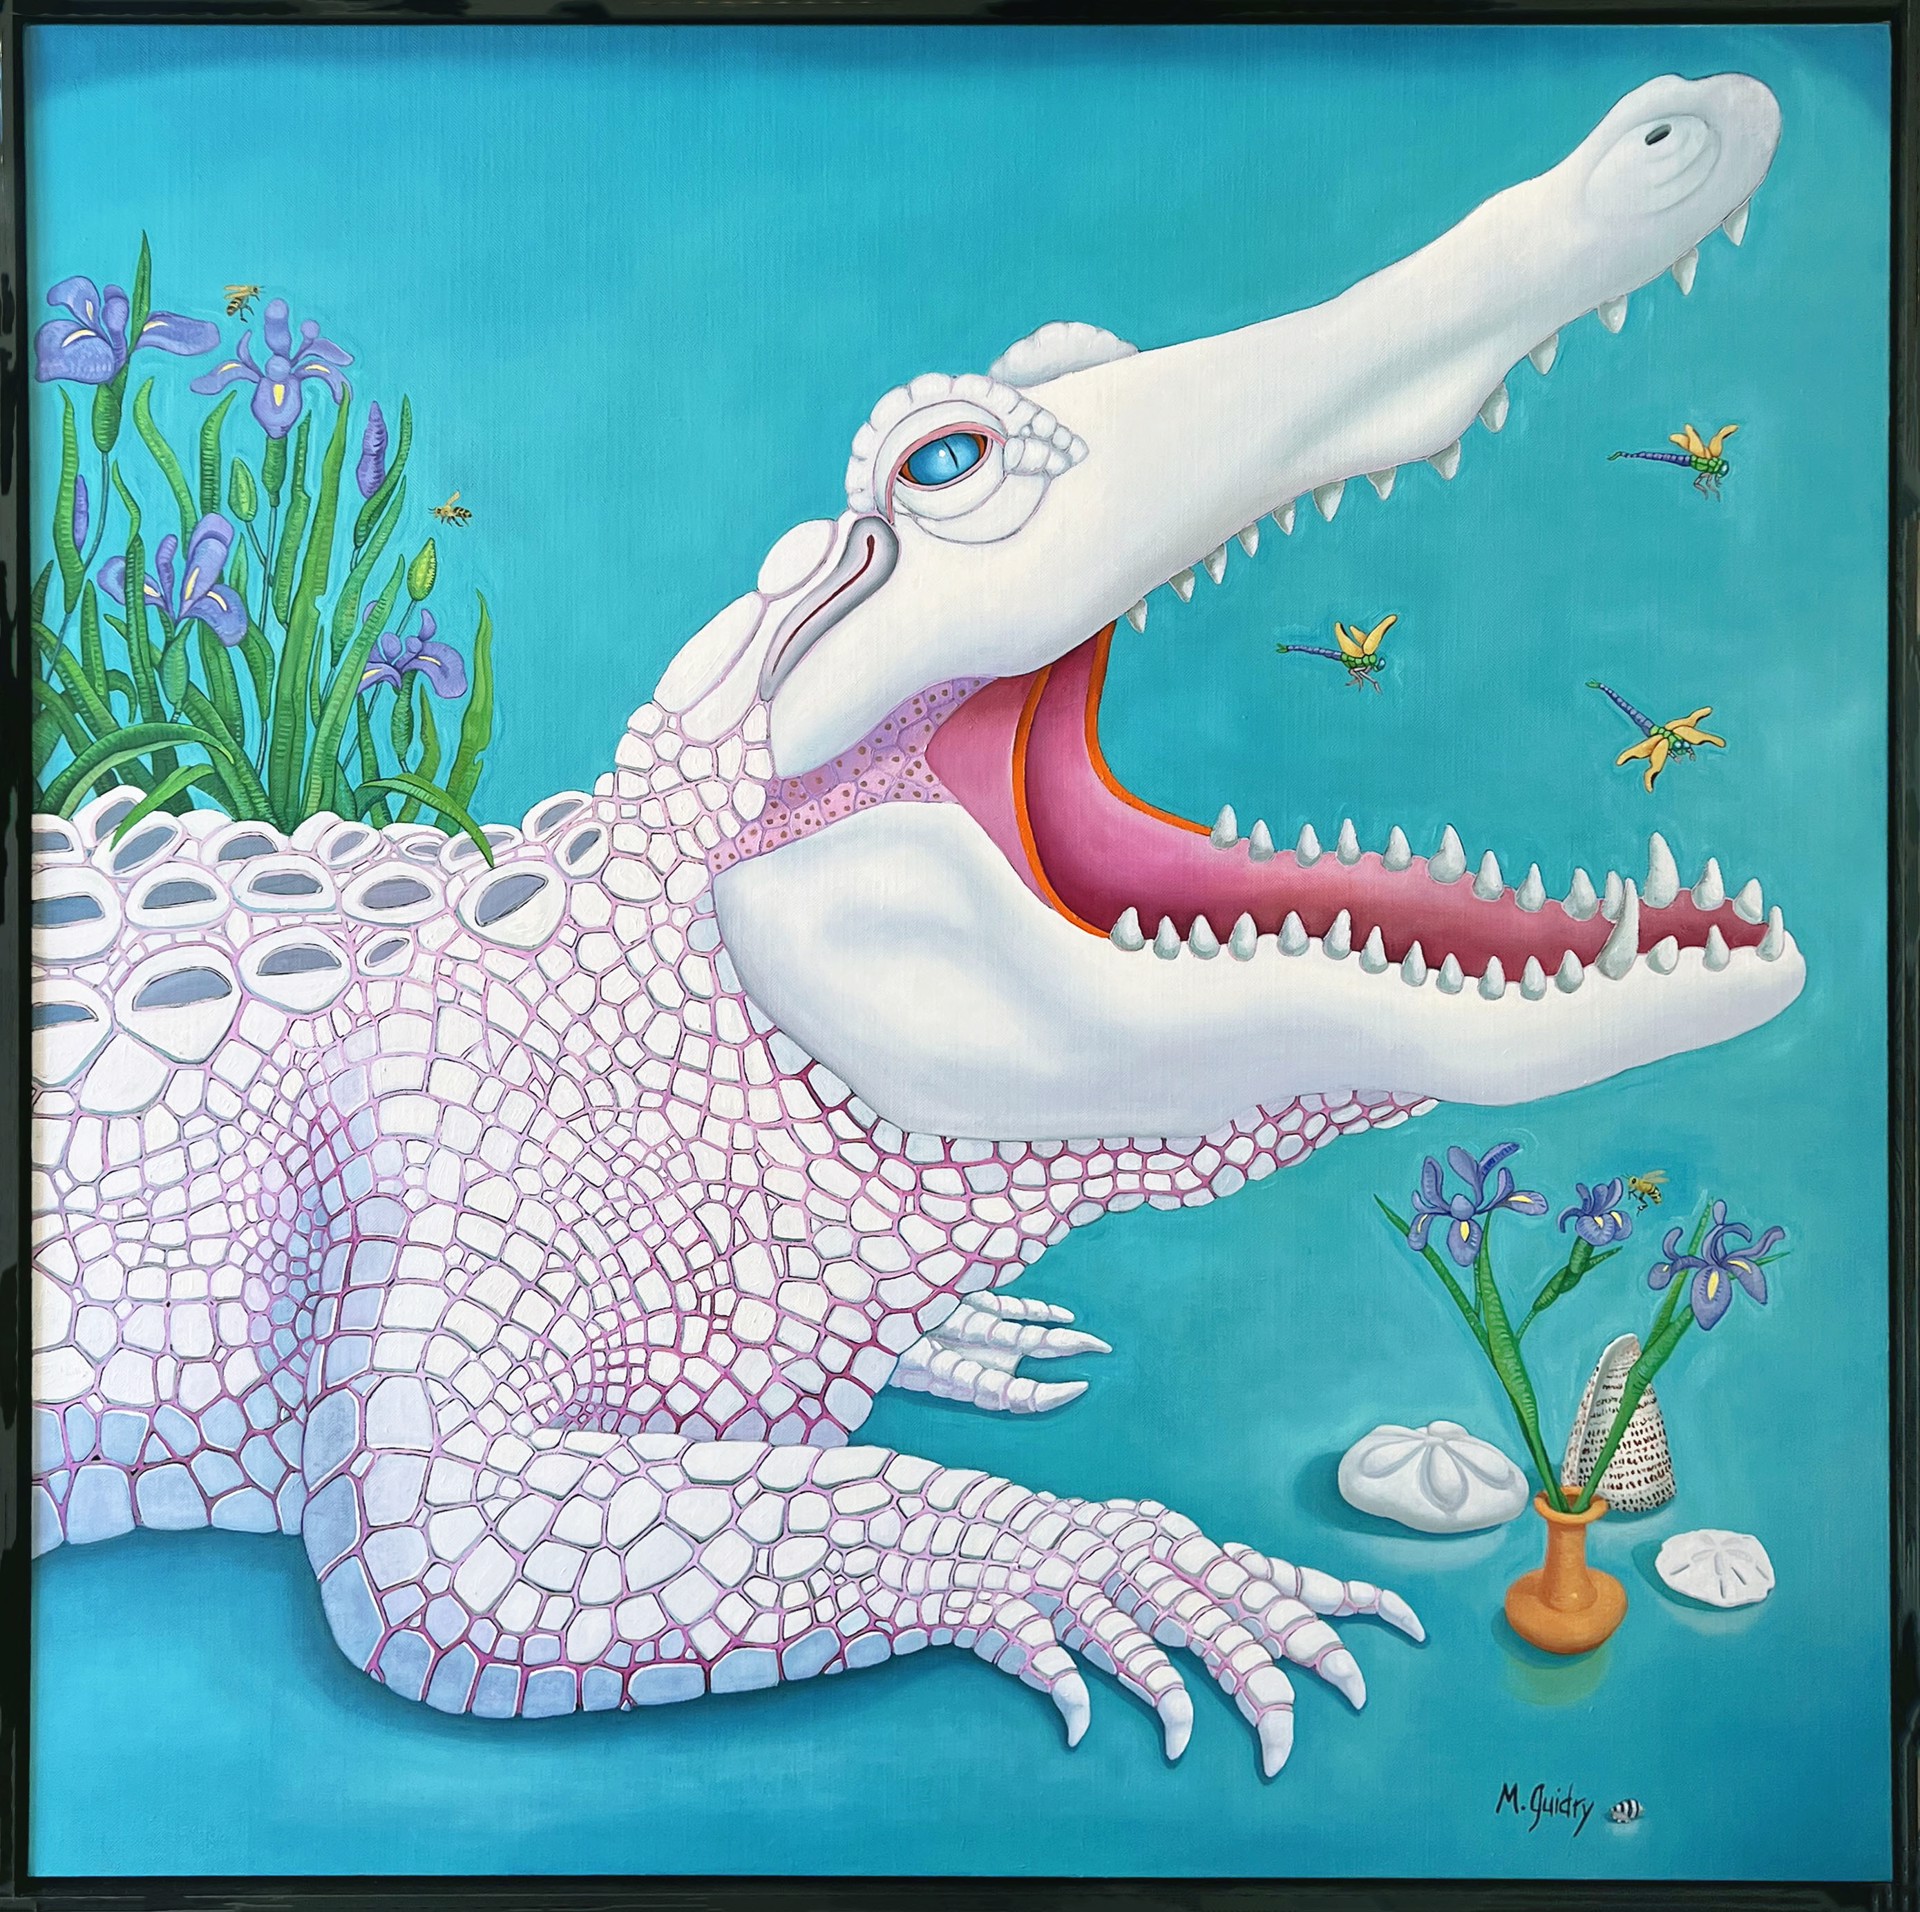 White Alligator by Michael Guidry